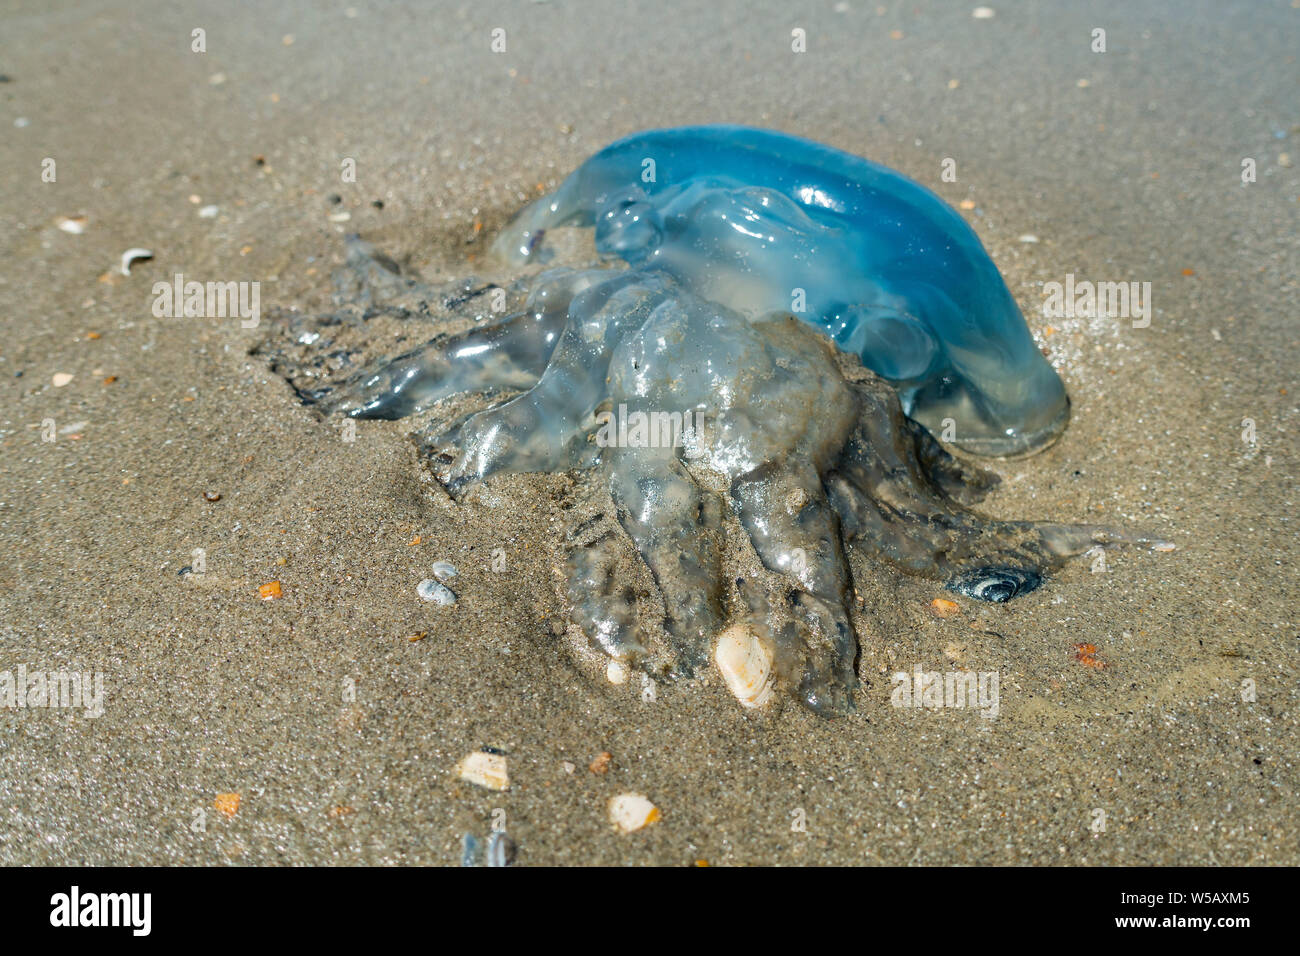 Barrel jellyfish / dustbin-lid jellyfish / frilly-mouthed jellyfish (Rhizostoma pulmo) washed ashore on the beach along the North Sea coast in summer Stock Photo